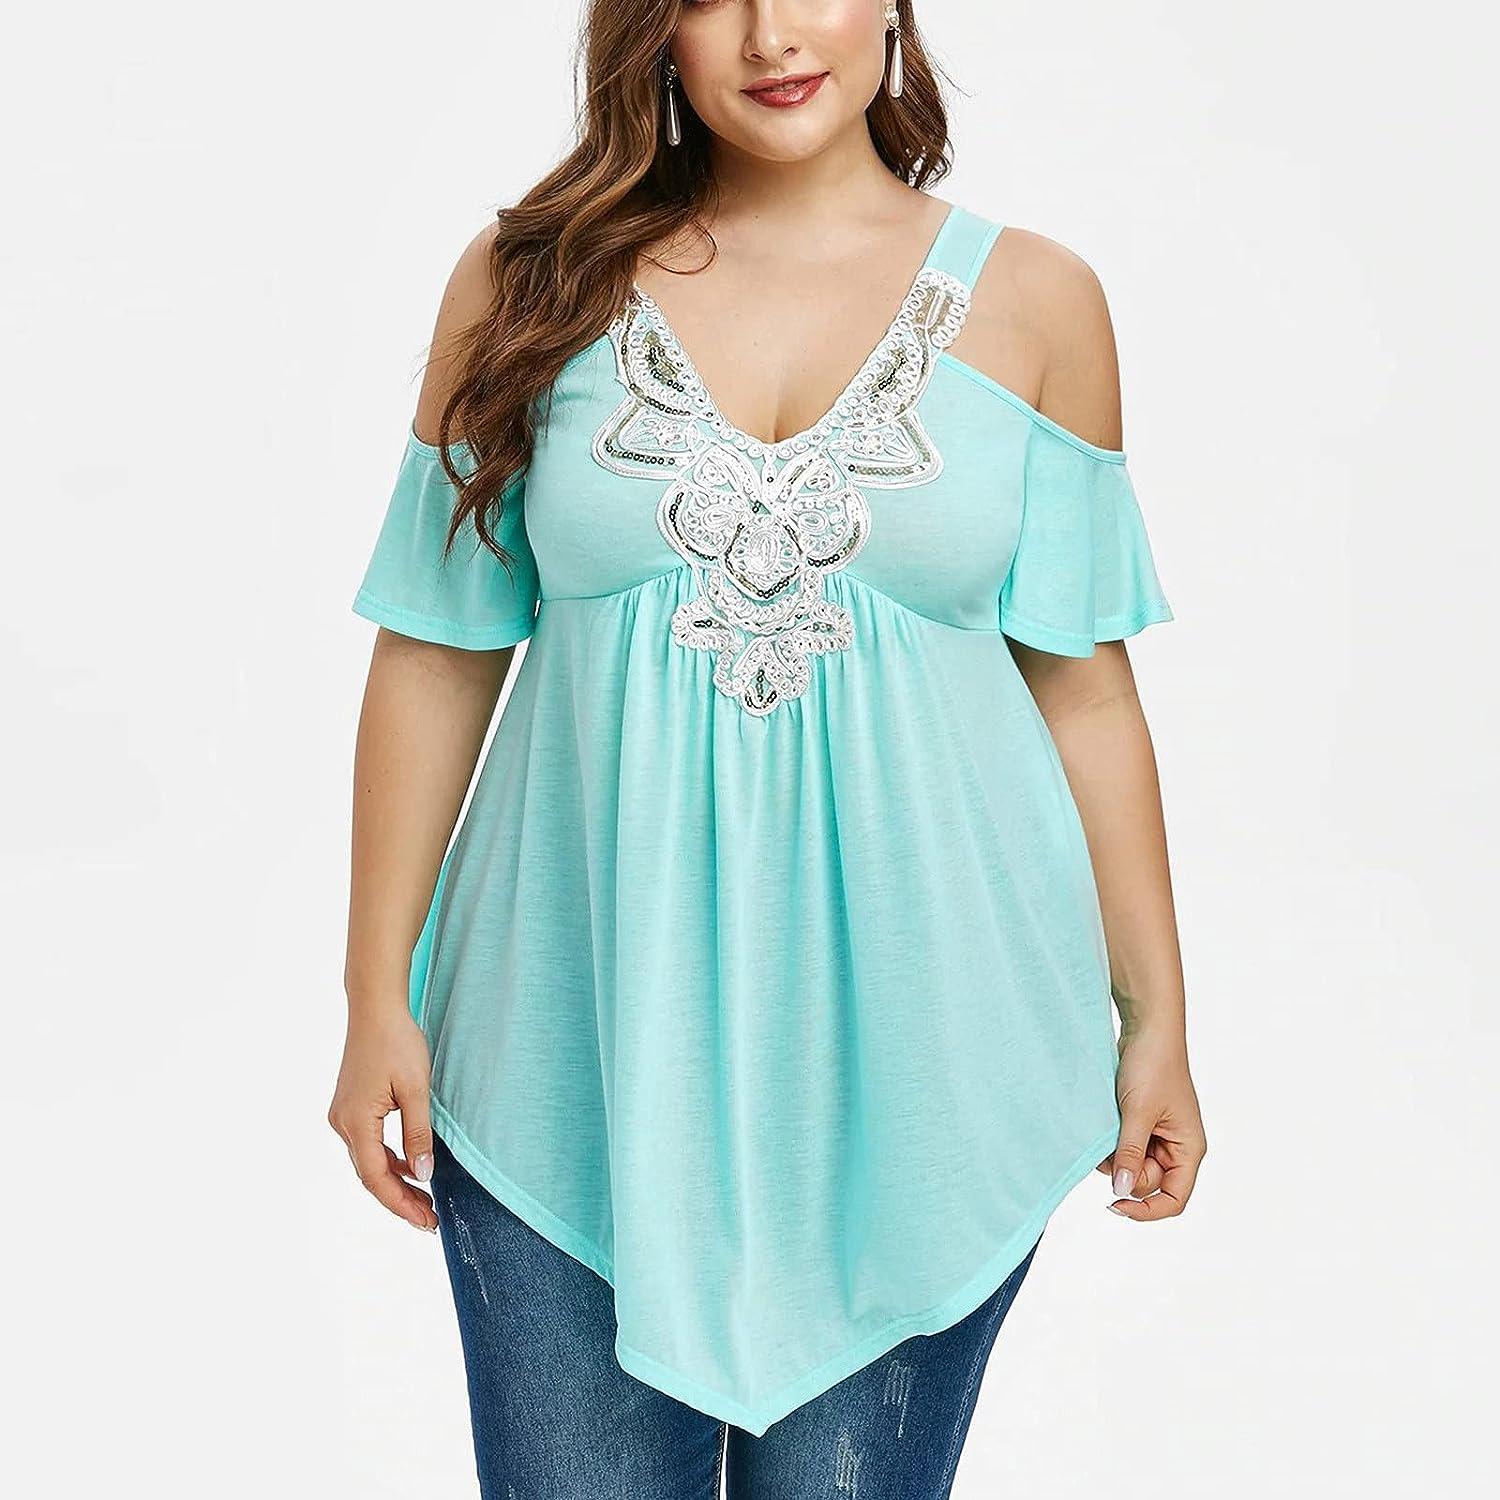 Women's Plus Size Tops Sexy Lace V Neck T-Shirt Summer Short